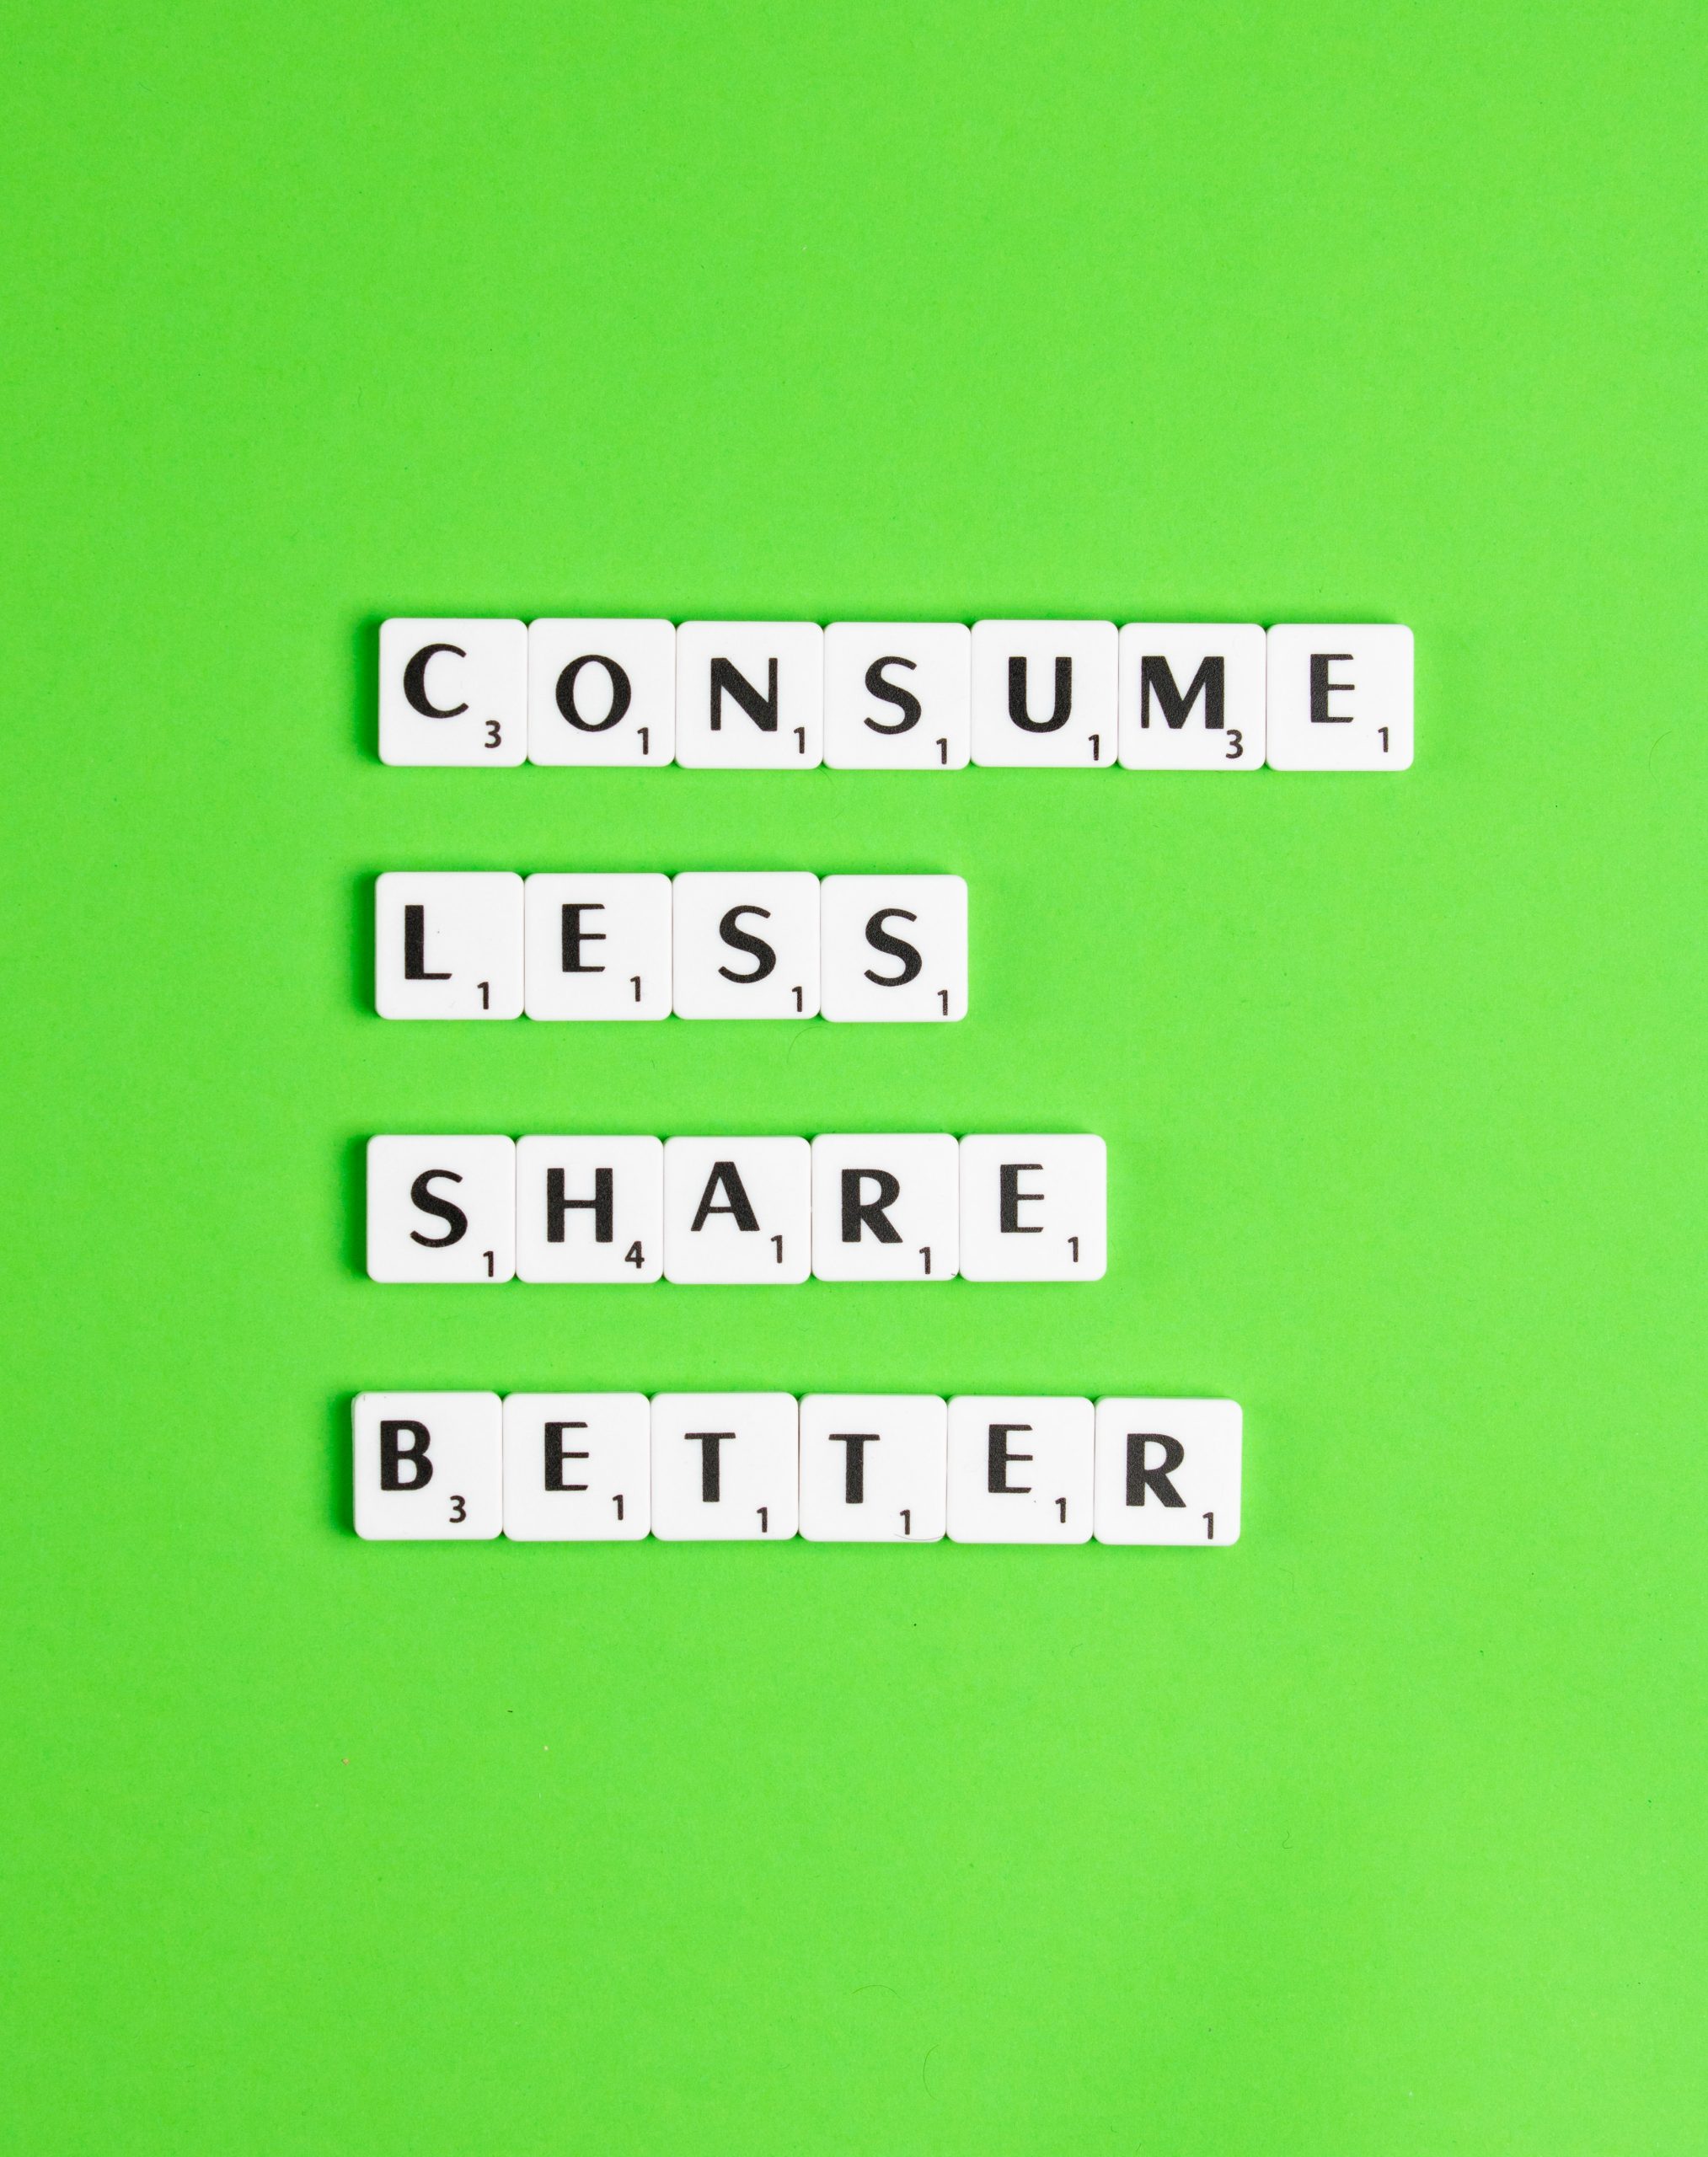 Consume less, share better